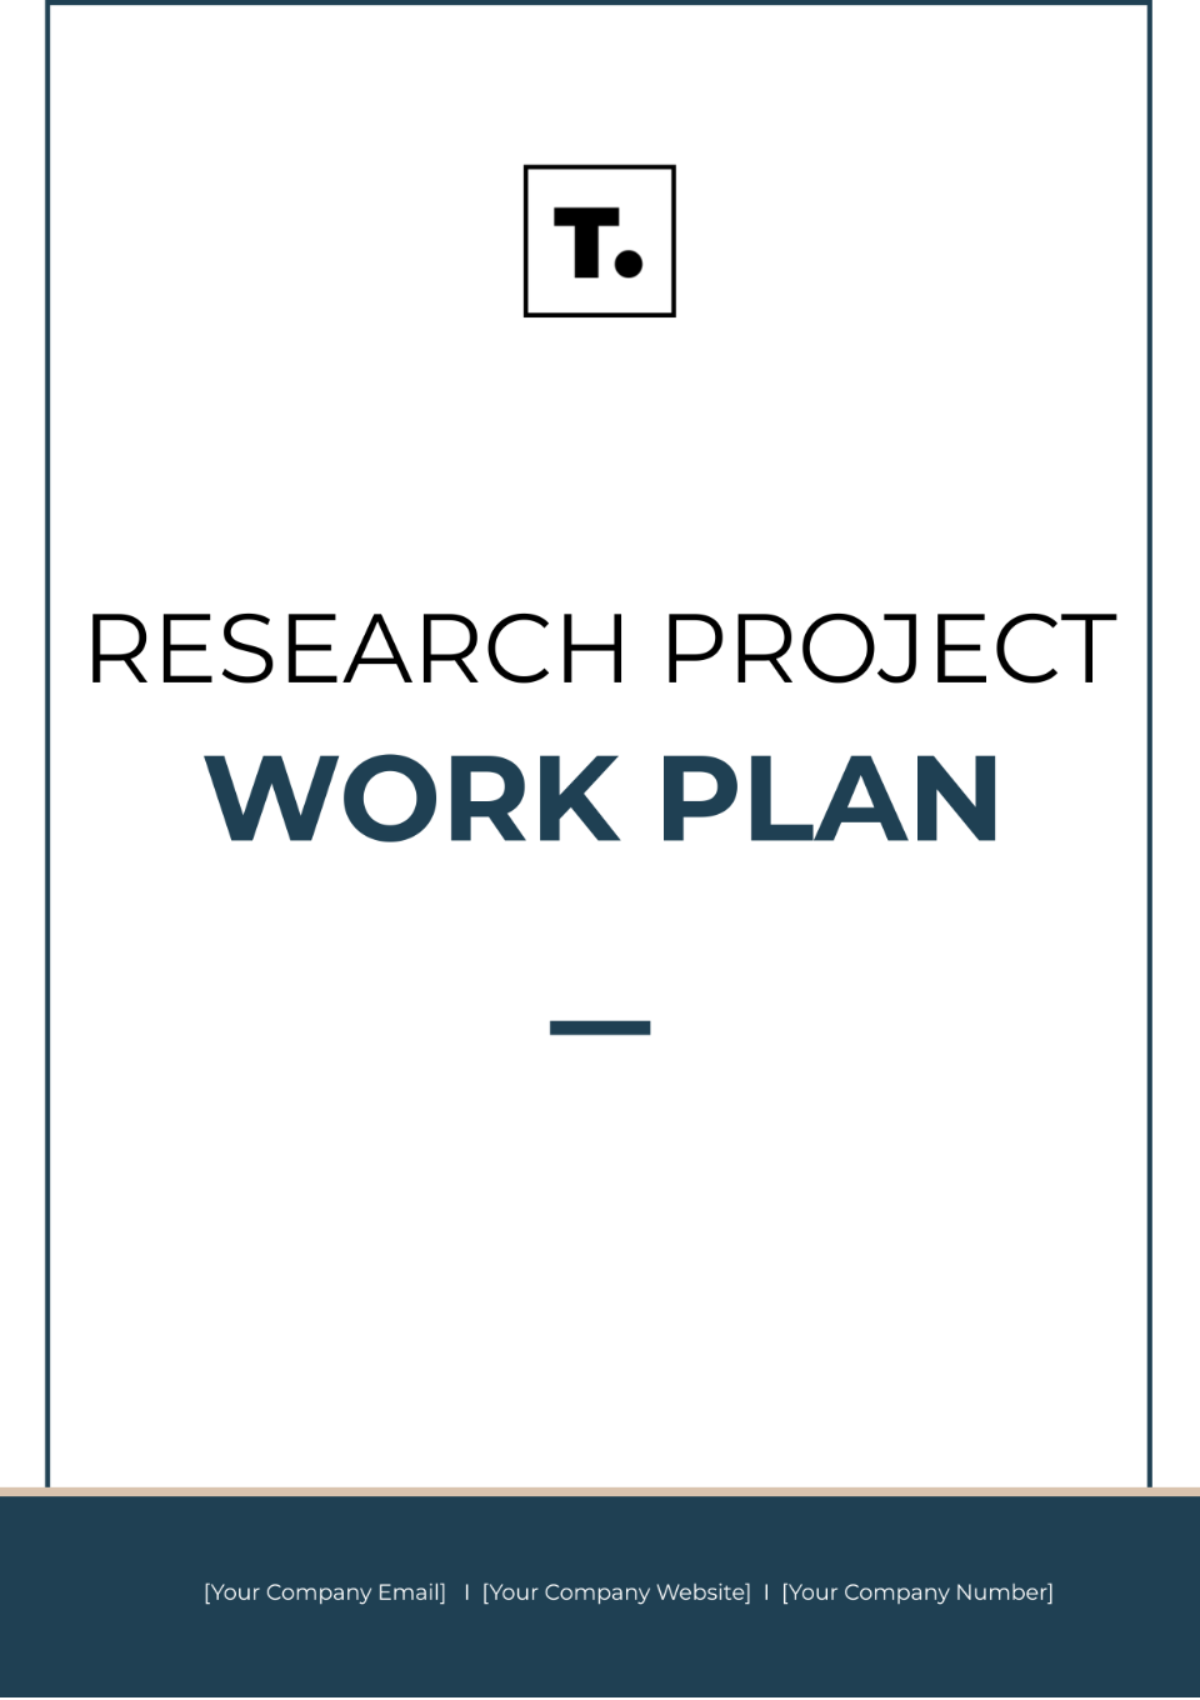 Free Research Project Work Plan Template